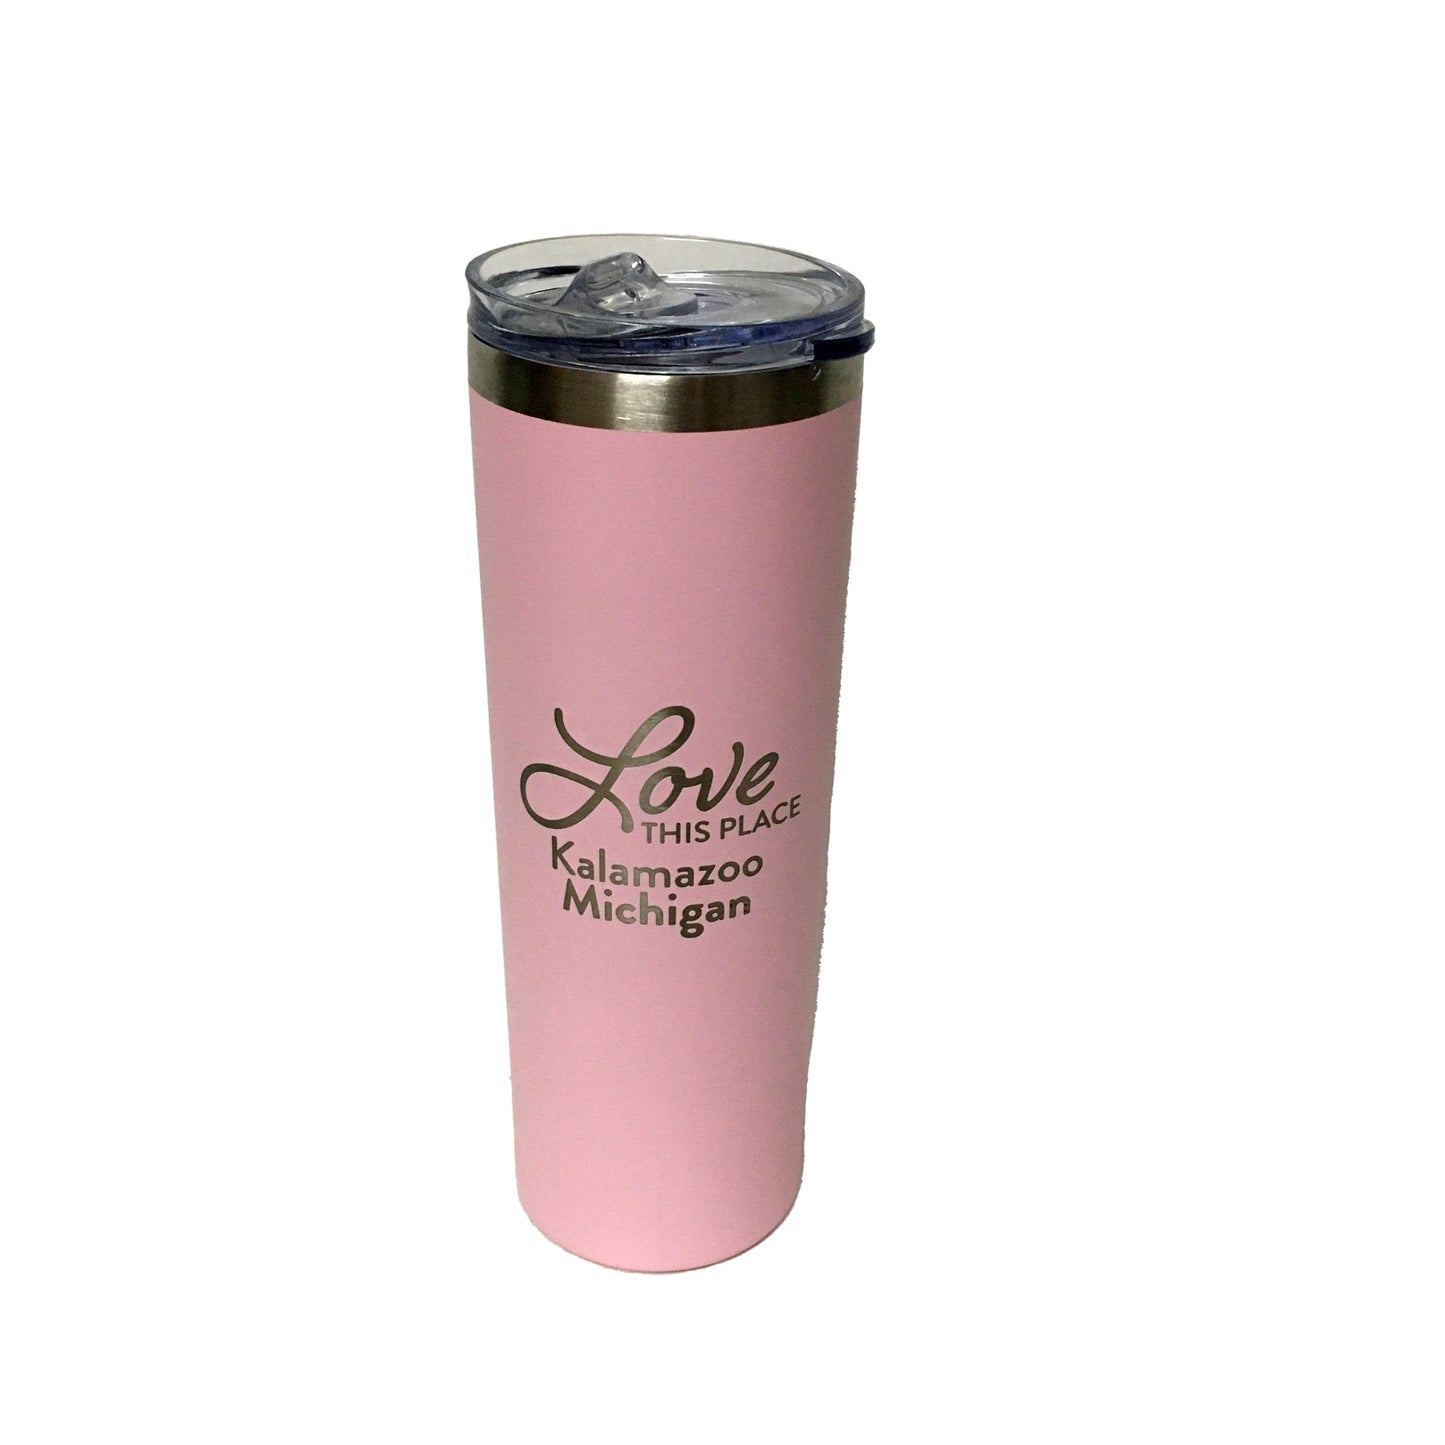 Kalamazoo "Love This Place" Insulated Tumbler With Reusable Straw